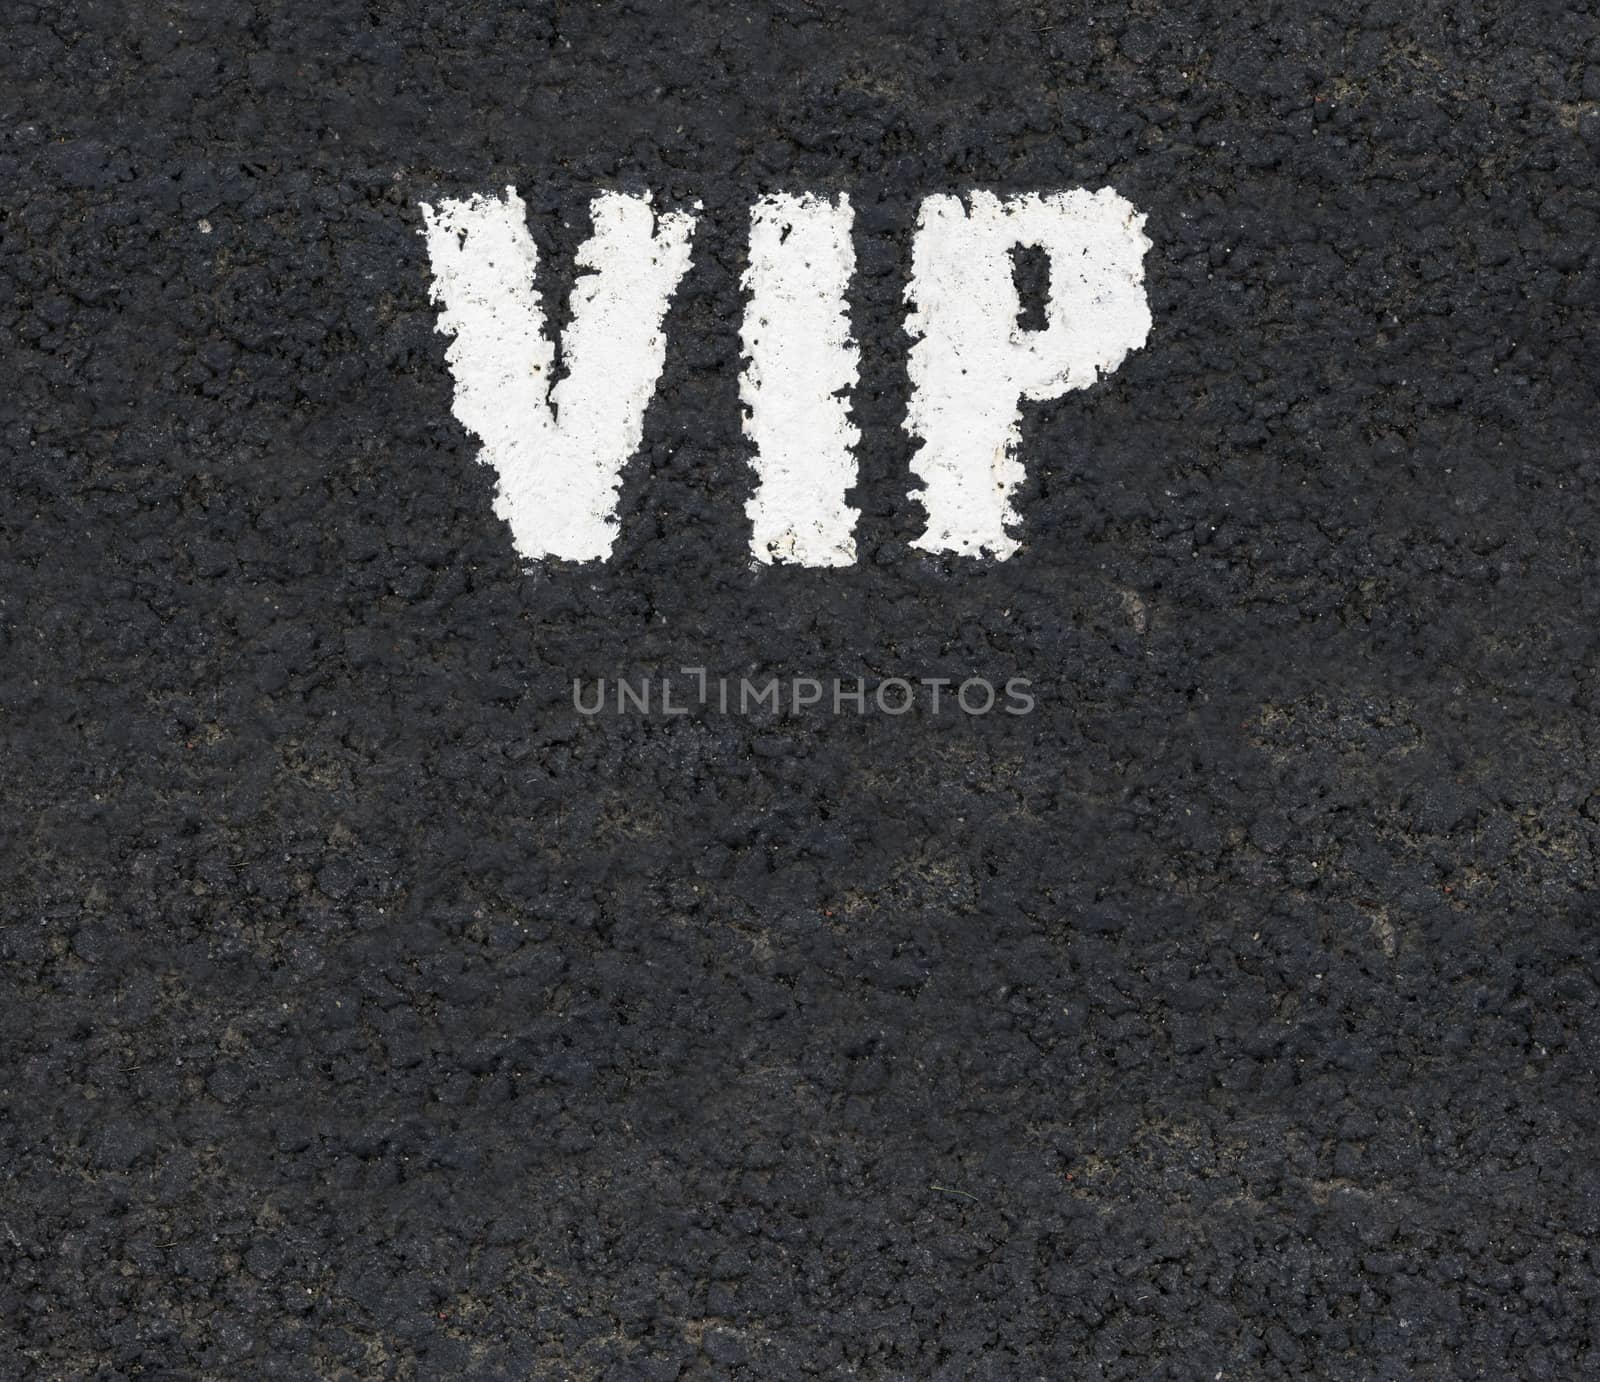 White Road Markings With VIP For Very Important Person With Copy Space